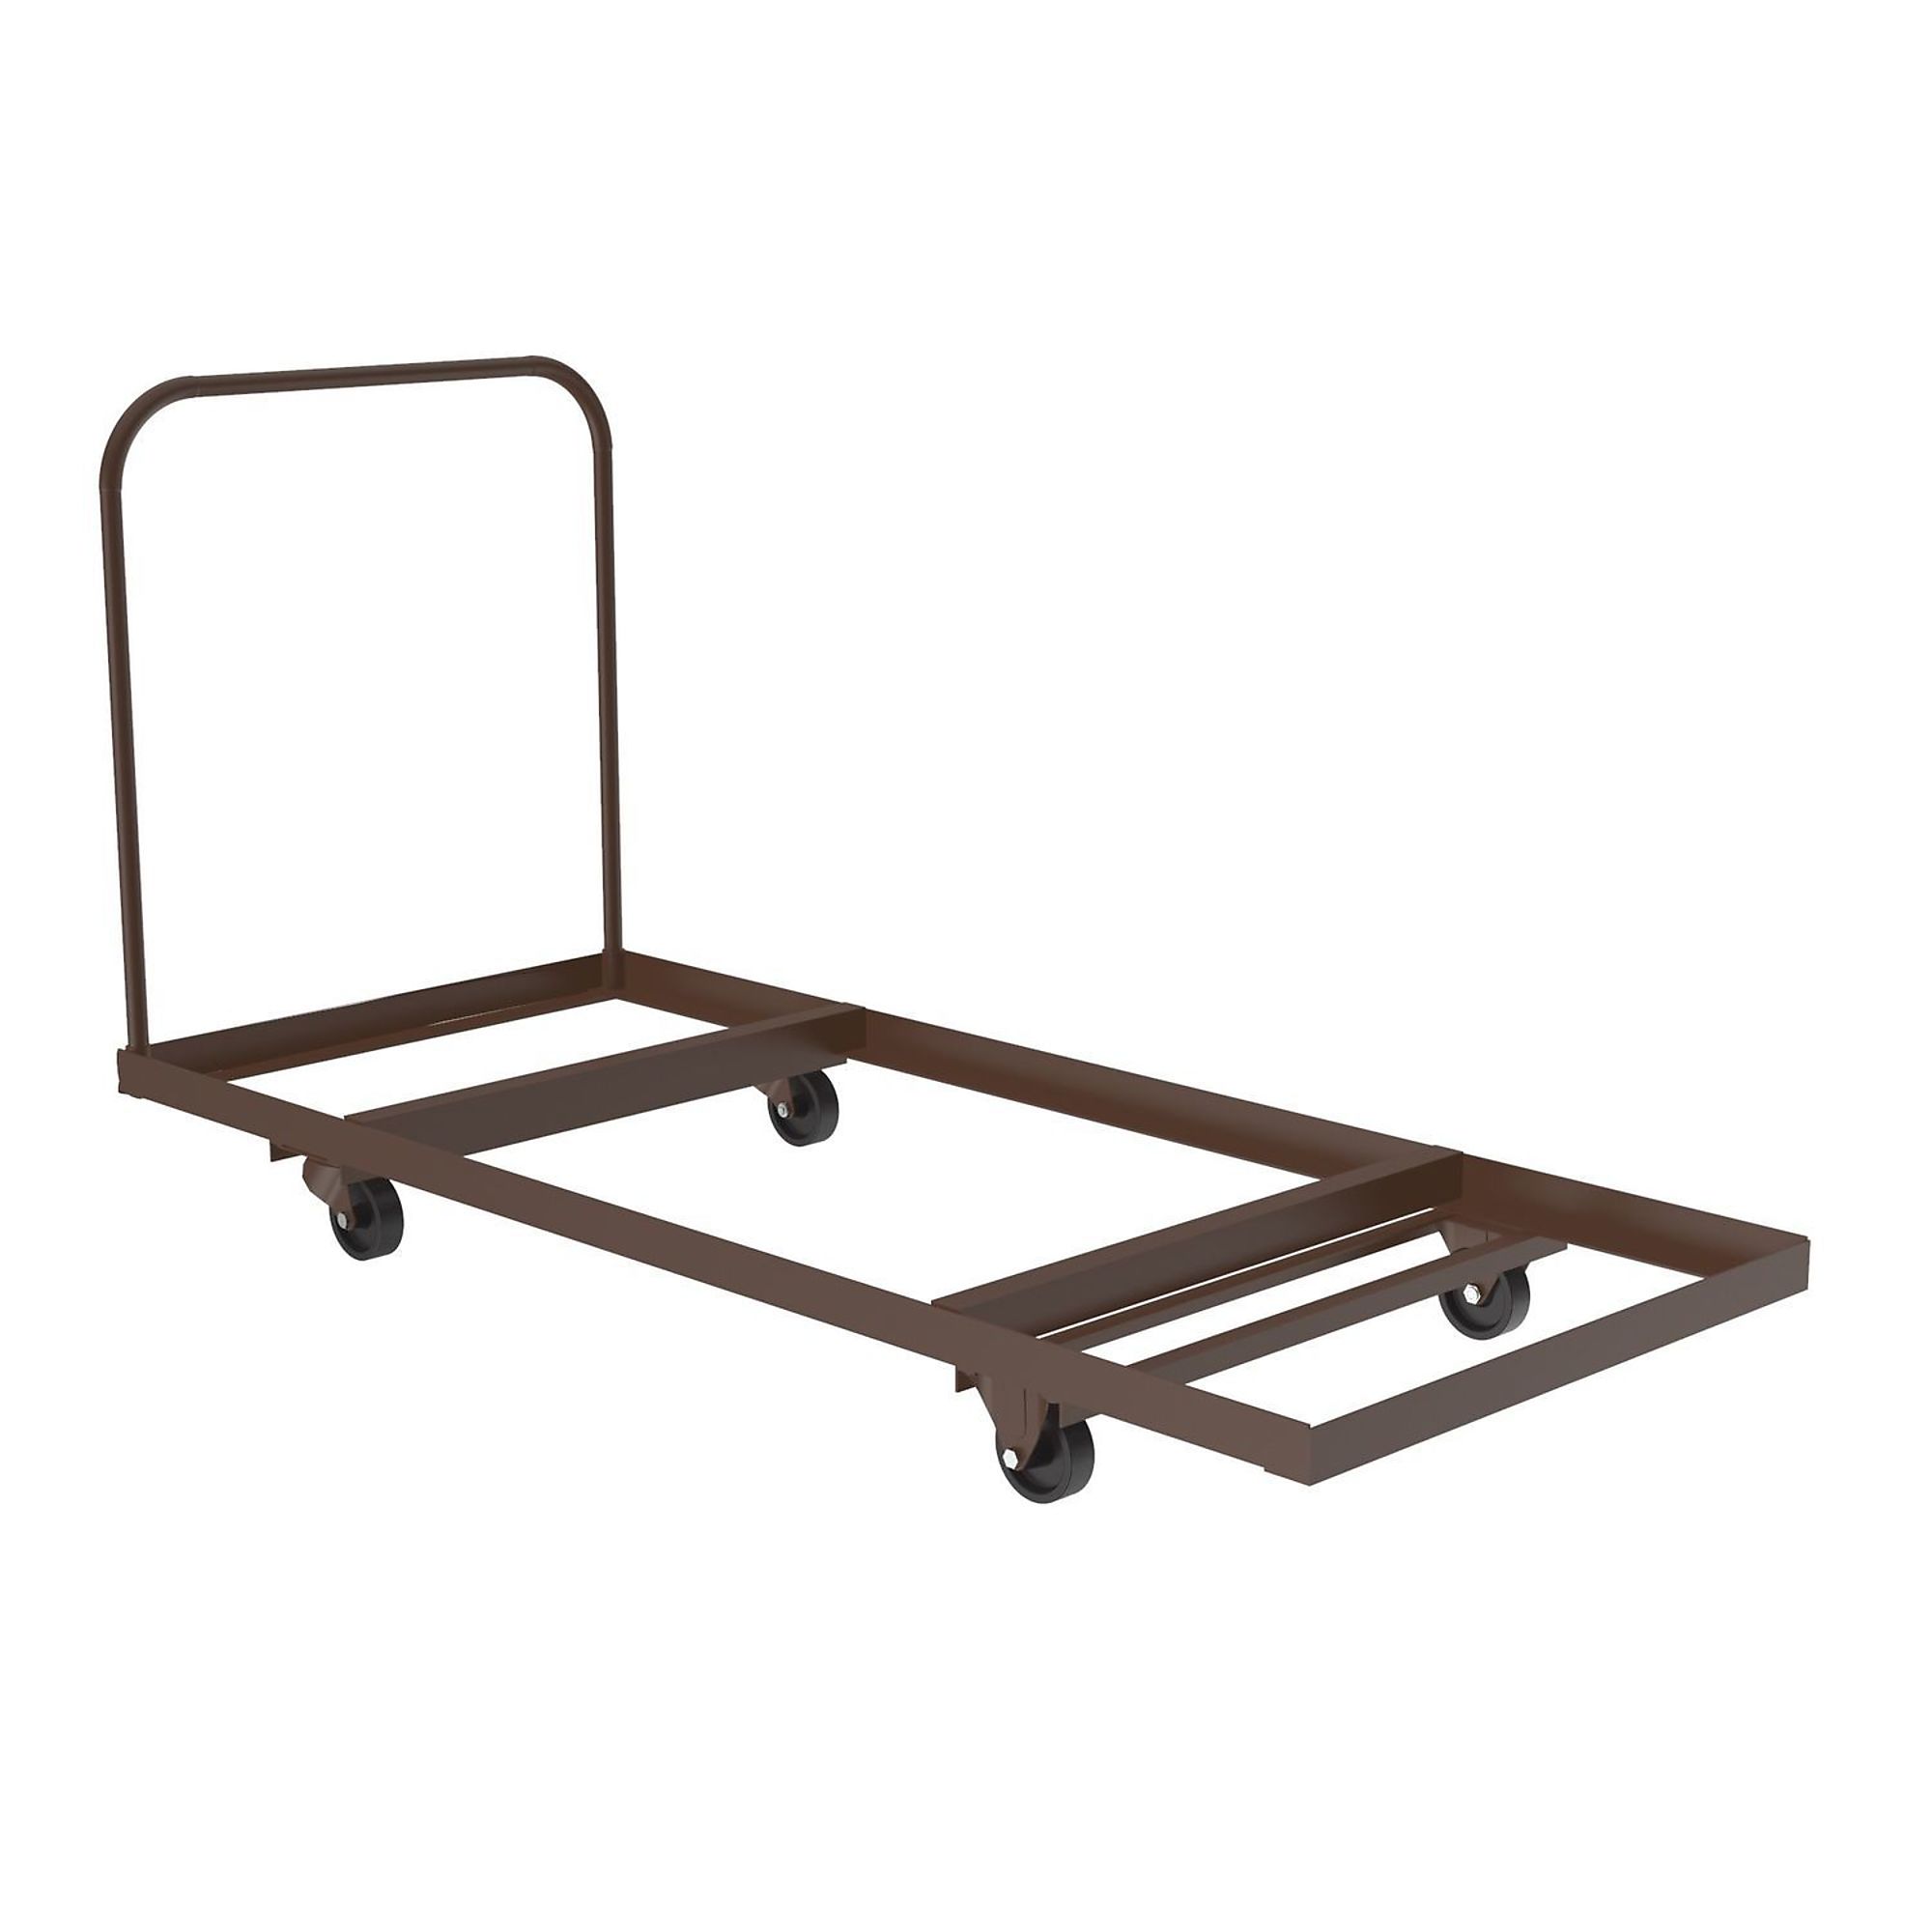 Truck for REC Tables up to 72Inch, Stacks up to 16, Capacity 16 lb, Frame Material Steel, Single, Pair, or Set Single, Model - Correll T3072-01